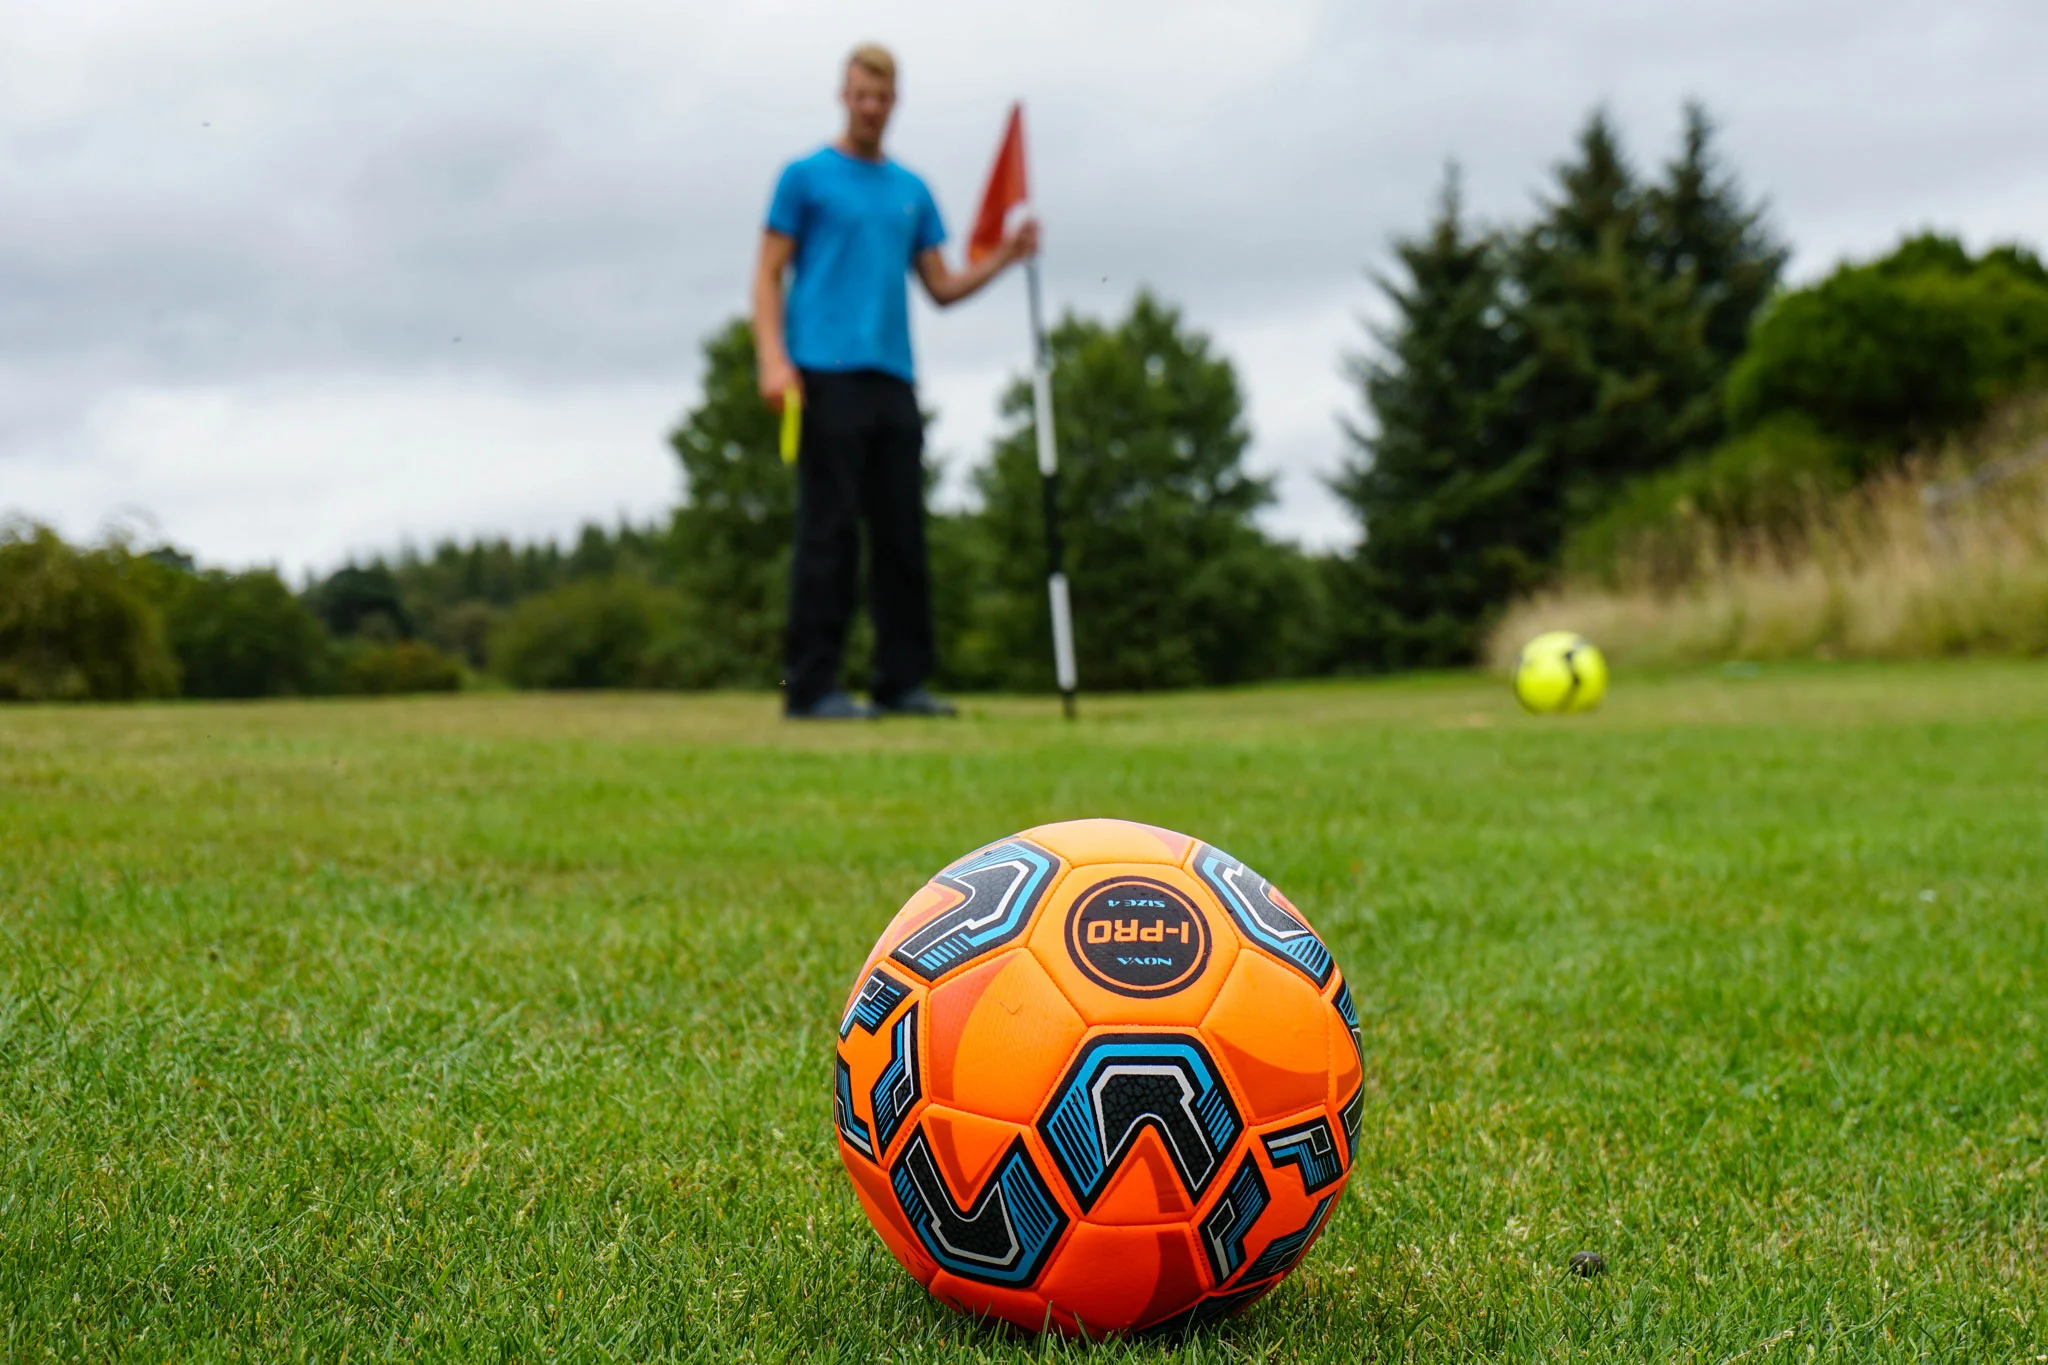 Foot golf in the Cairngorms